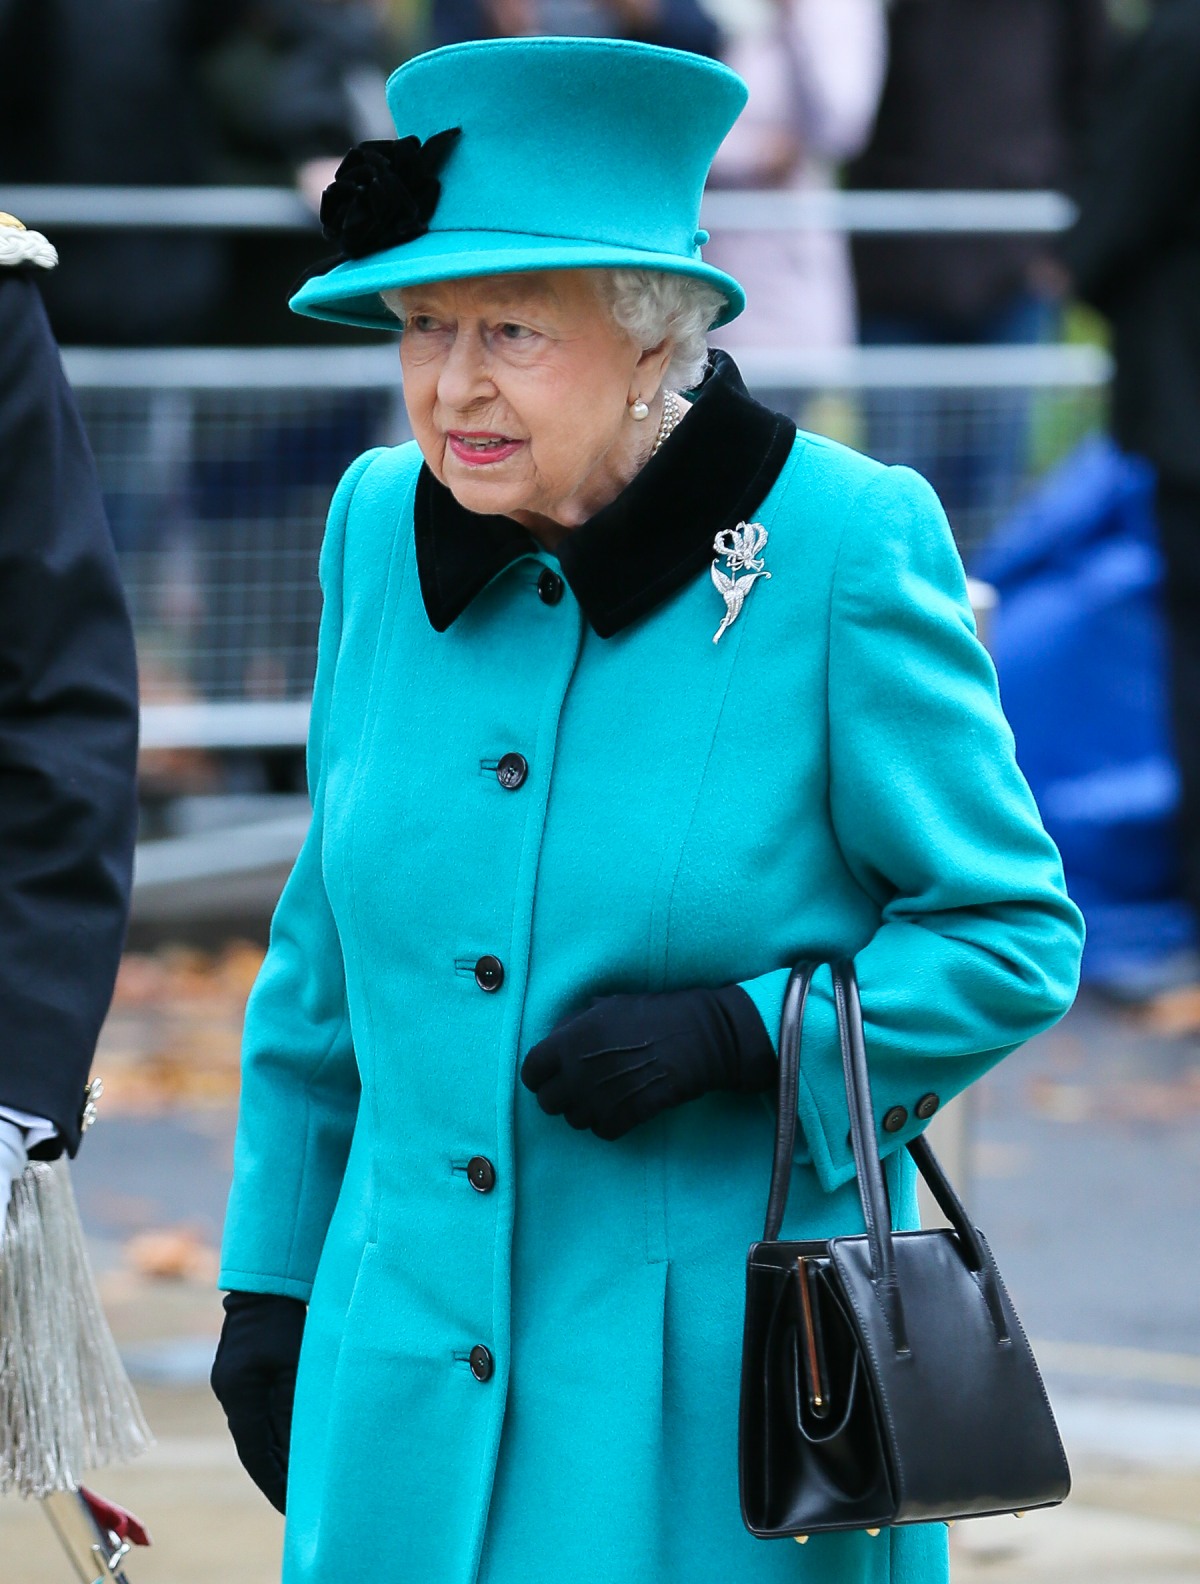 Her Royal Highness Queen Elizabeth II arriving at the Coram to officially open The Queen Elizabeth II Centre